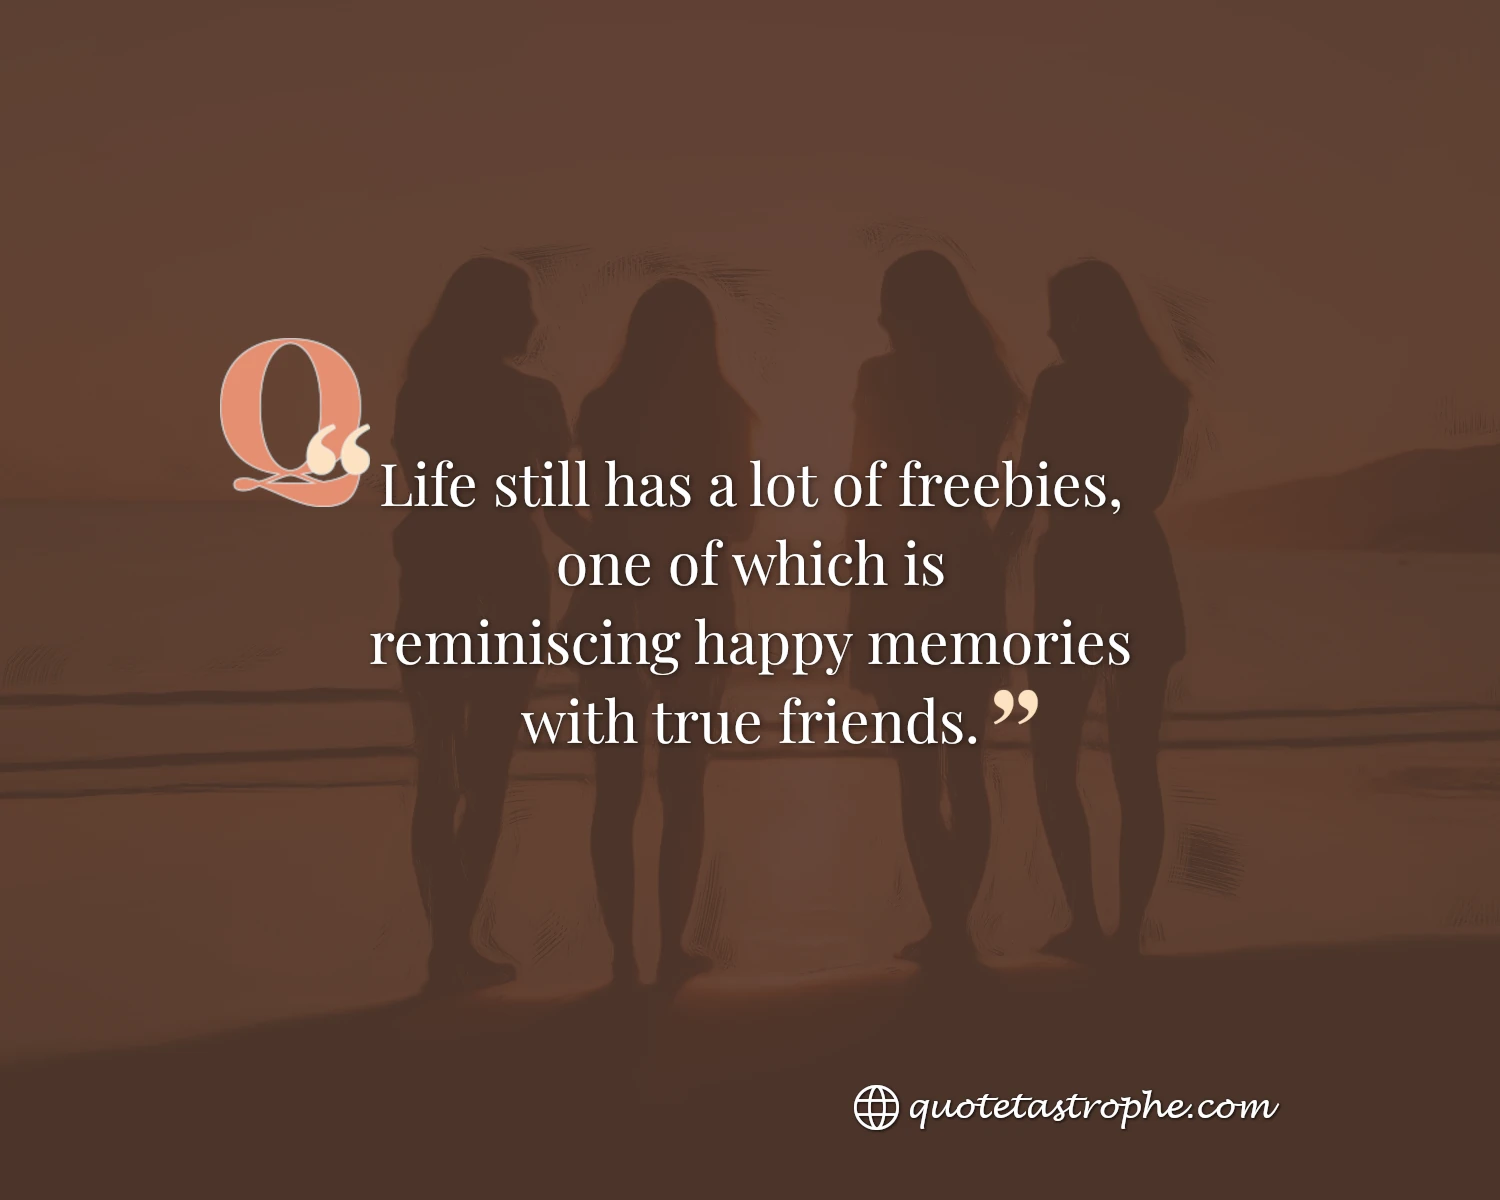 One Life's Freebie is Reminiscing Memories With Friends